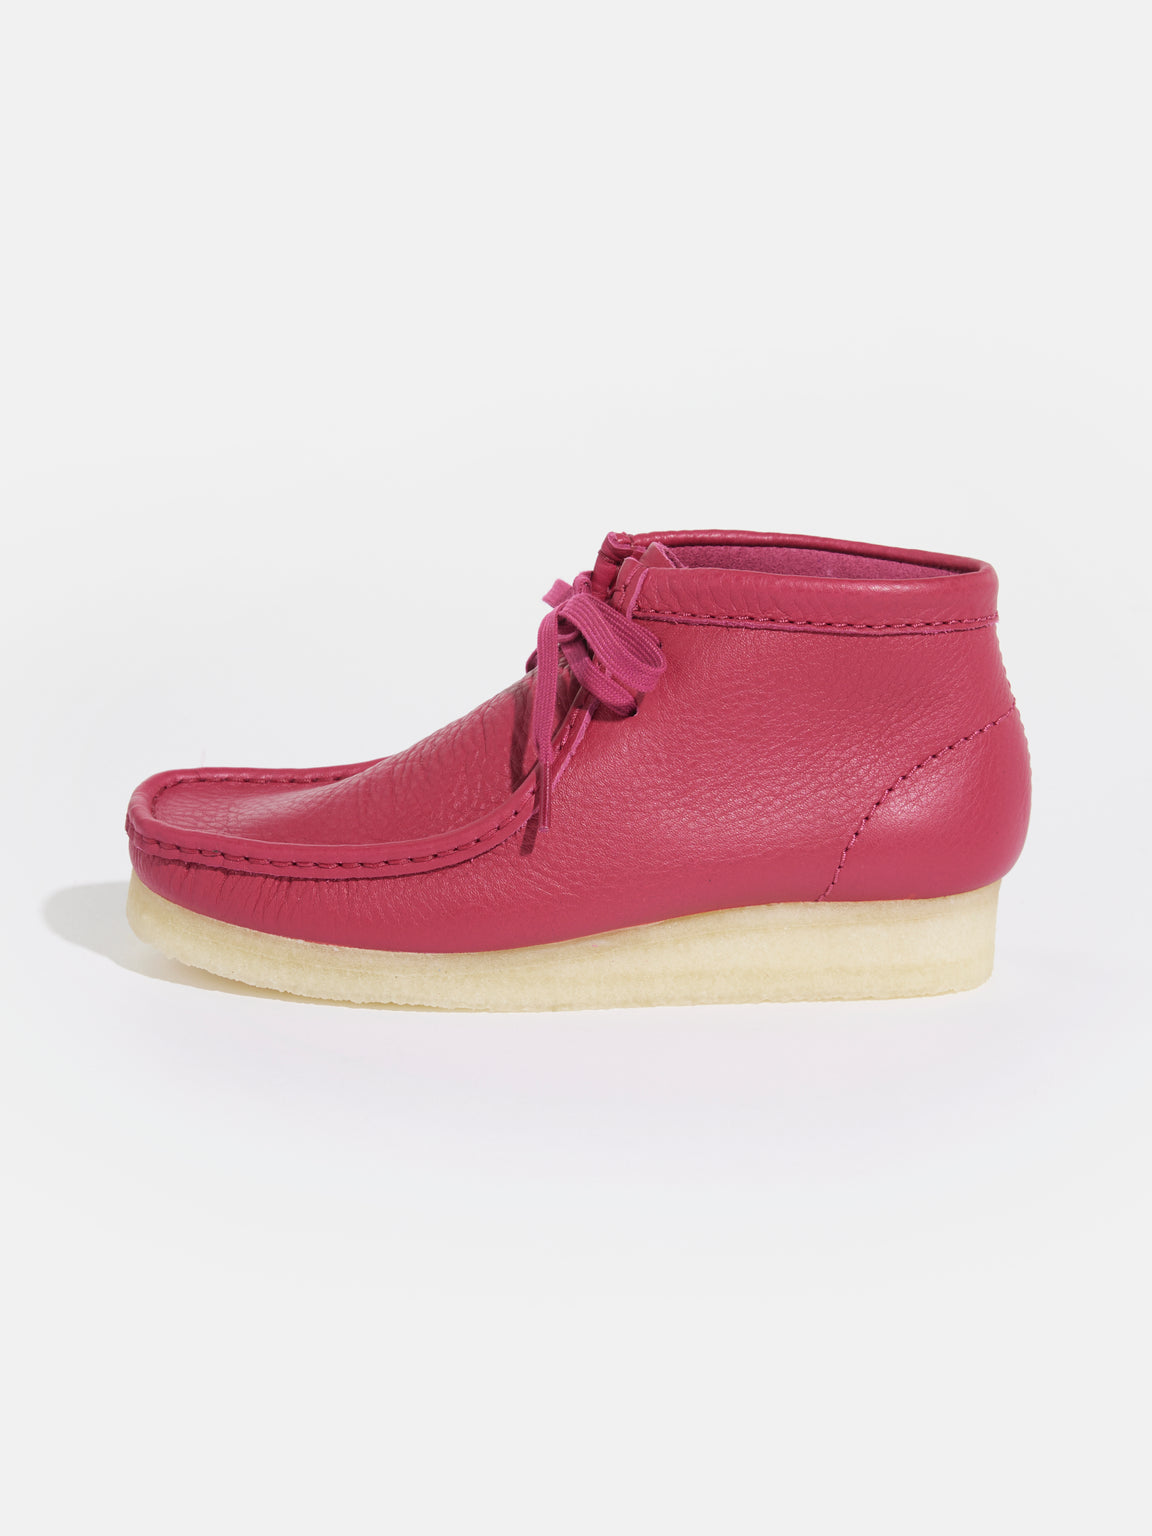 CLARKS | WALLABEE BOOTS FOR WOMEN BERRY